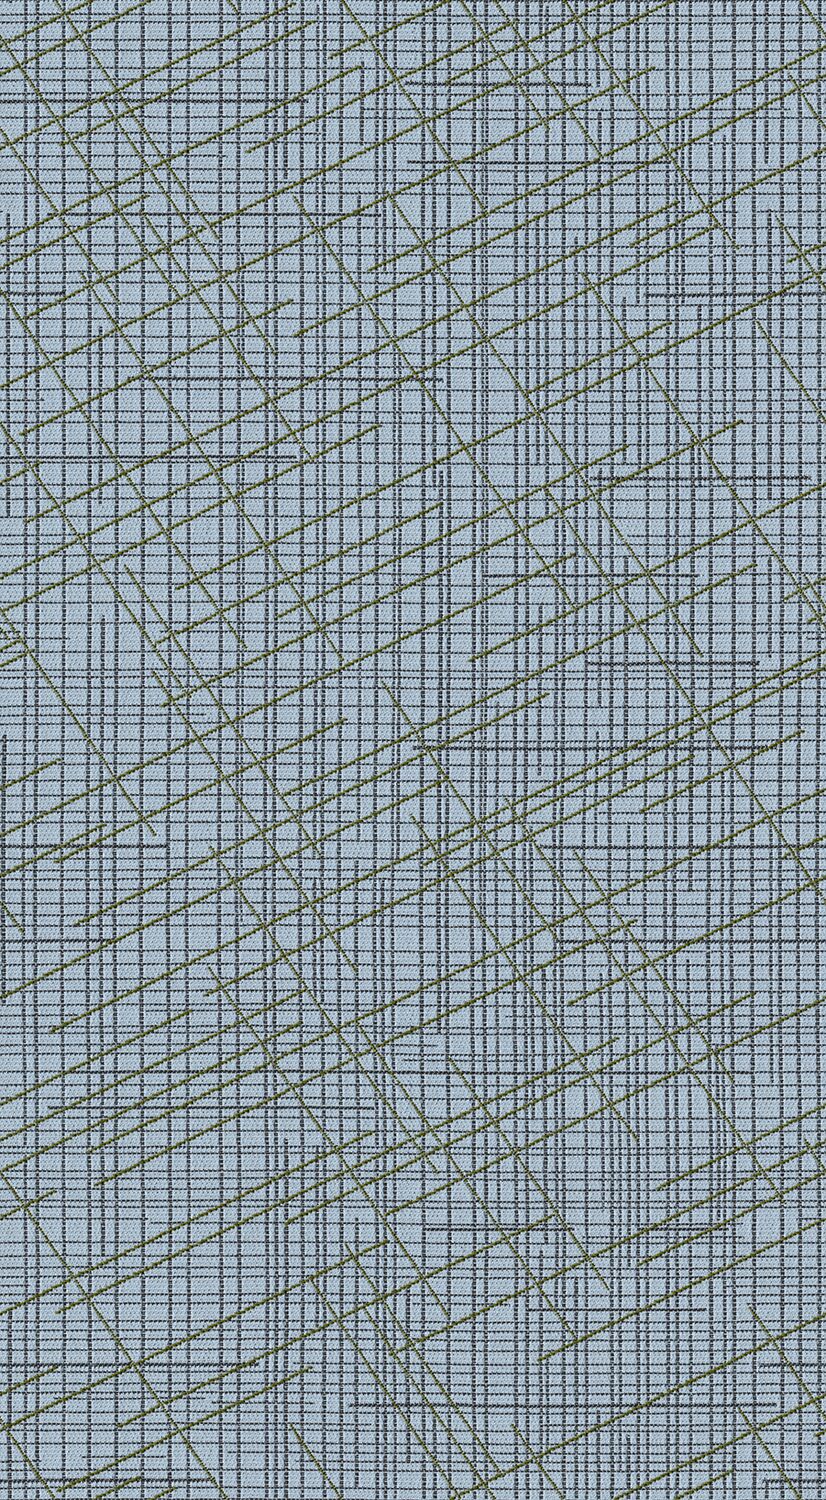 Intraweb - Polarity - 2002 - 08 Tileable Swatches